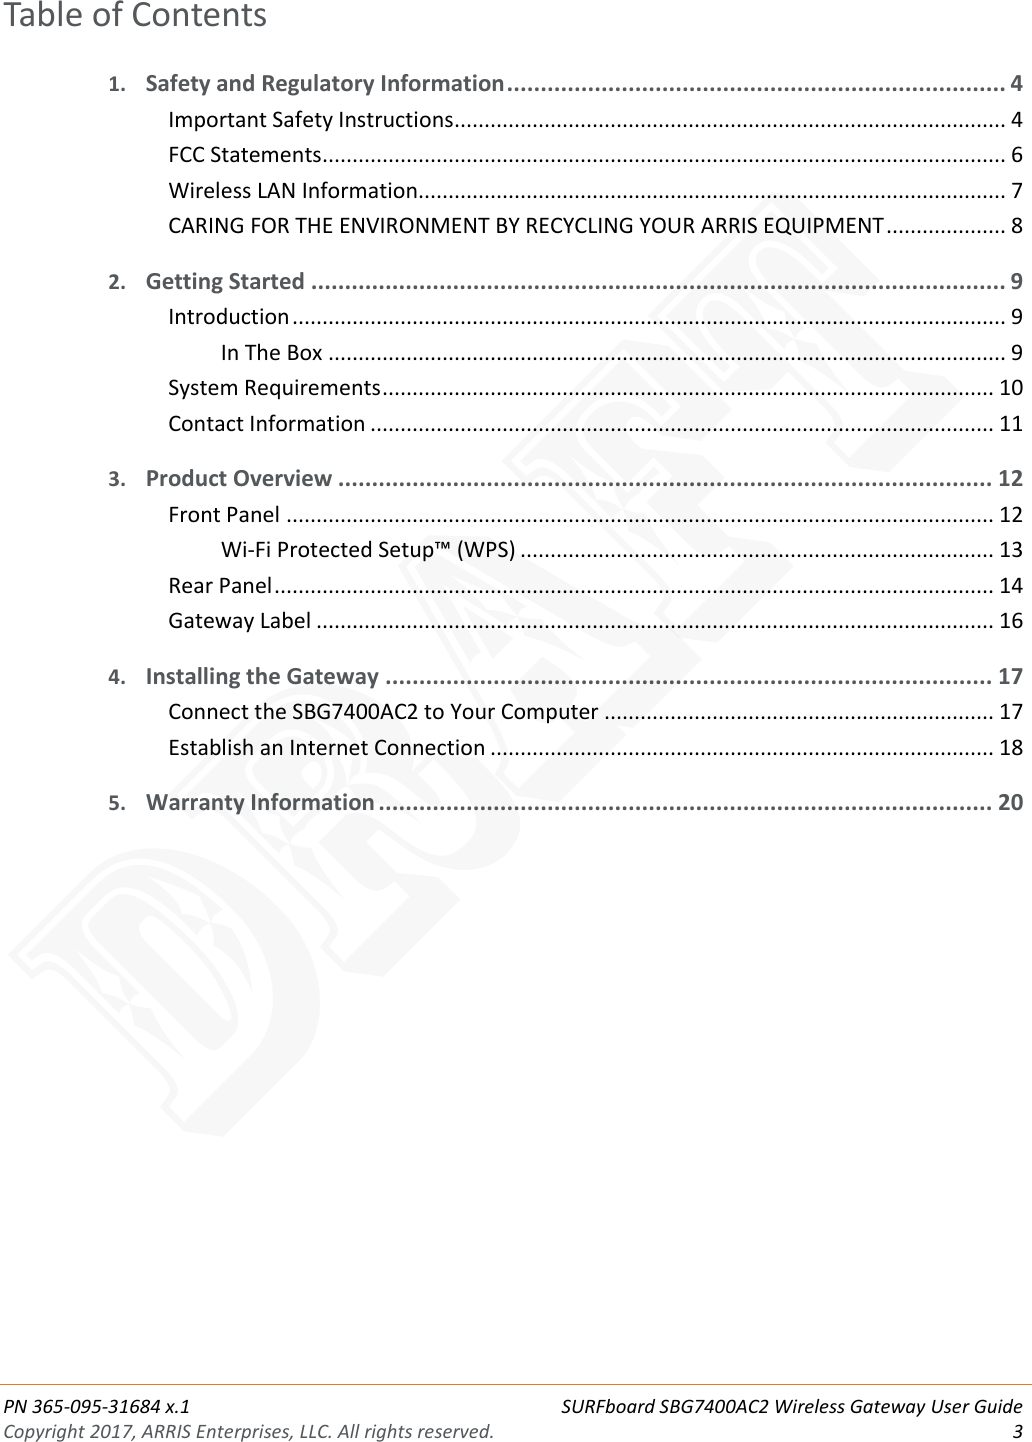  PN 365-095-31684 x.1 SURFboard SBG7400AC2 Wireless Gateway User Guide Copyright 2017, ARRIS Enterprises, LLC. All rights reserved.  3  Table of Contents 1. Safety and Regulatory Information .......................................................................... 4 Important Safety Instructions ............................................................................................ 4 FCC Statements .................................................................................................................. 6 Wireless LAN Information.................................................................................................. 7 CARING FOR THE ENVIRONMENT BY RECYCLING YOUR ARRIS EQUIPMENT .................... 8 2. Getting Started ....................................................................................................... 9 Introduction ....................................................................................................................... 9 In The Box ................................................................................................................. 9 System Requirements ...................................................................................................... 10 Contact Information ........................................................................................................ 11 3. Product Overview ................................................................................................. 12 Front Panel ...................................................................................................................... 12 Wi-Fi Protected Setup™ (WPS) ............................................................................... 13 Rear Panel ........................................................................................................................ 14 Gateway Label ................................................................................................................. 16 4. Installing the Gateway .......................................................................................... 17 Connect the SBG7400AC2 to Your Computer ................................................................. 17 Establish an Internet Connection .................................................................................... 18 5. Warranty Information ........................................................................................... 20   DRAFT